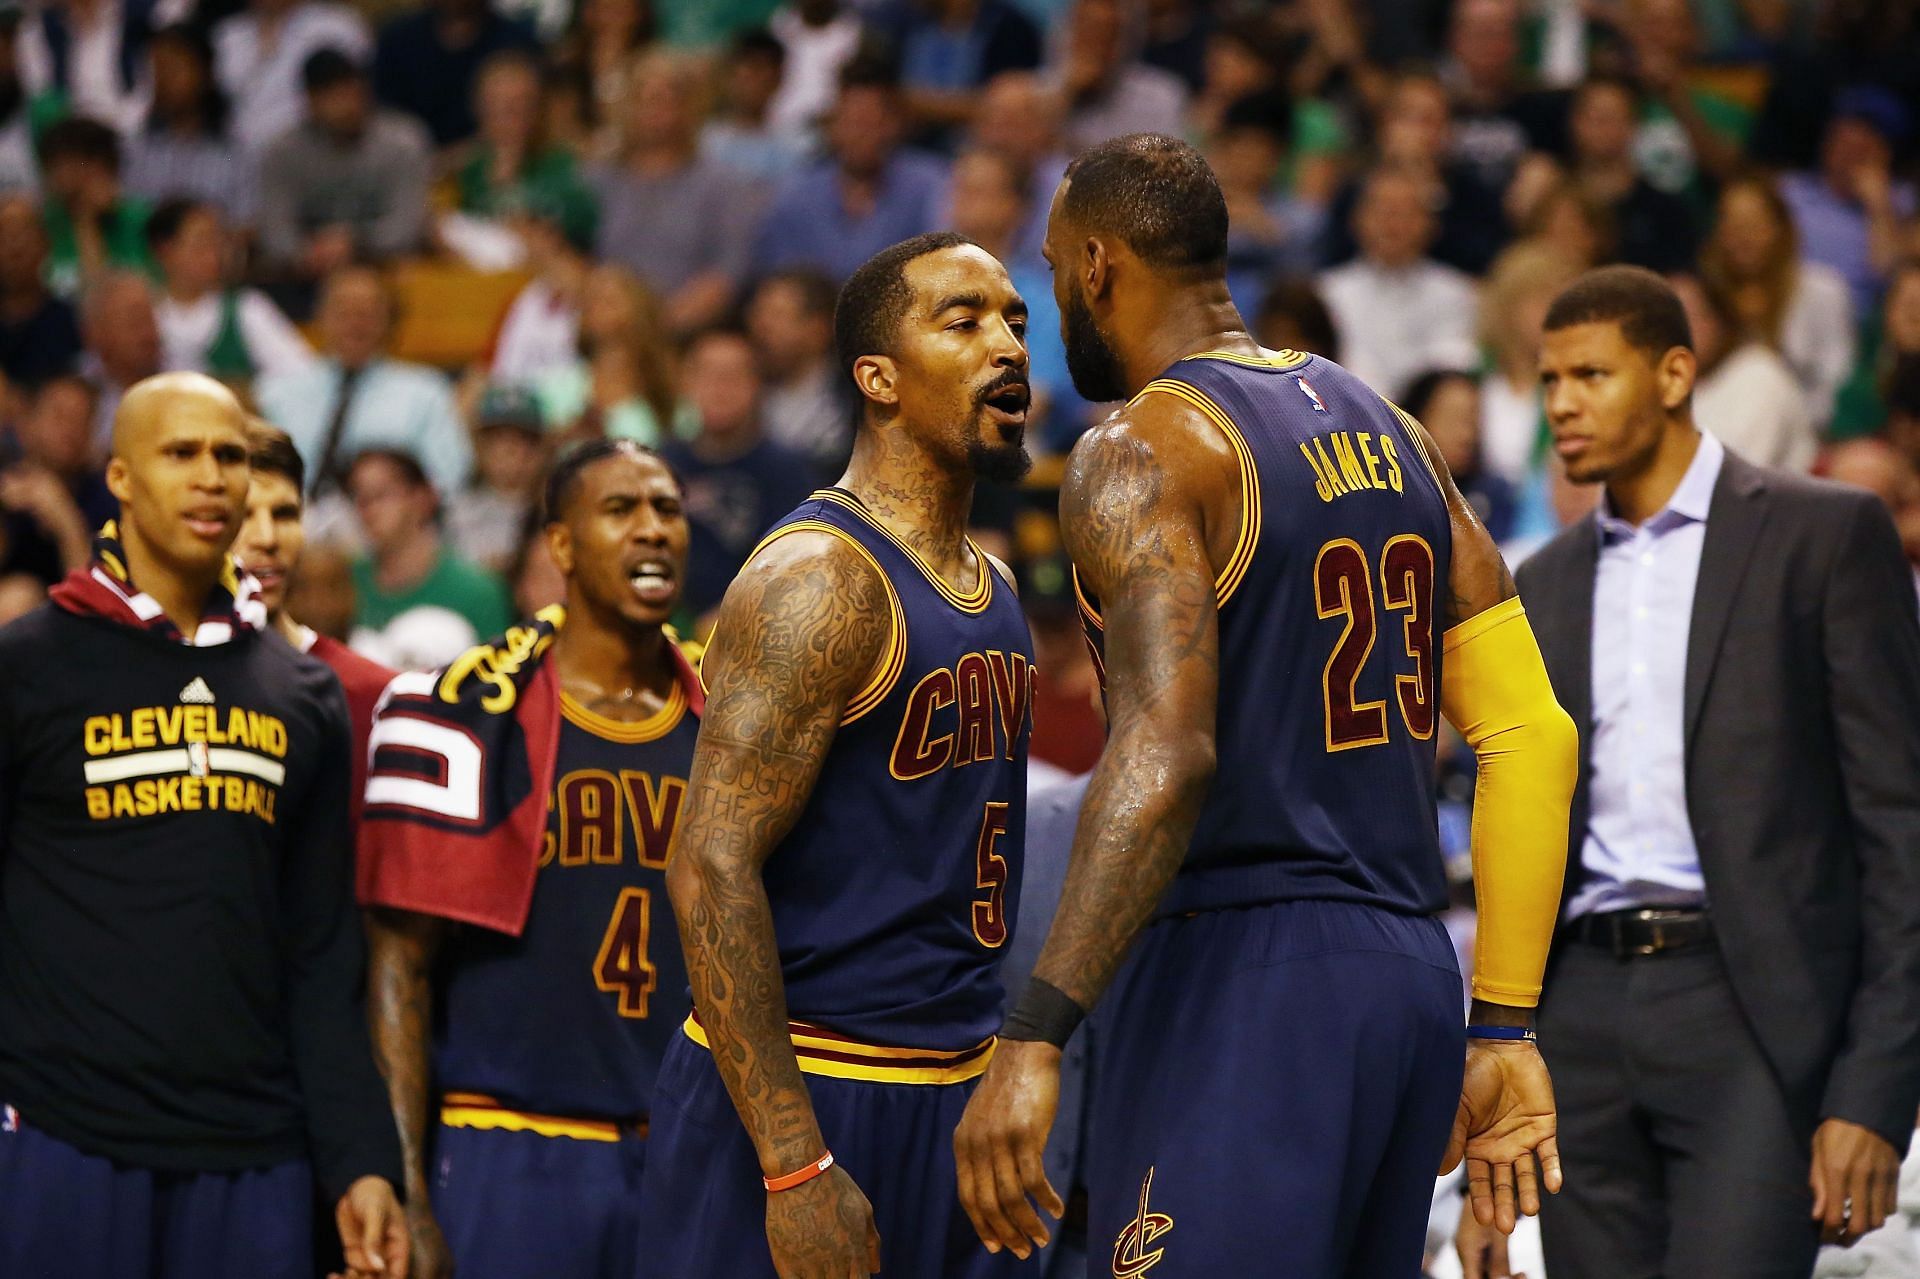 LeBron James and J.R. Smith lost the 2018 NBAFinals after blowing Game 1.